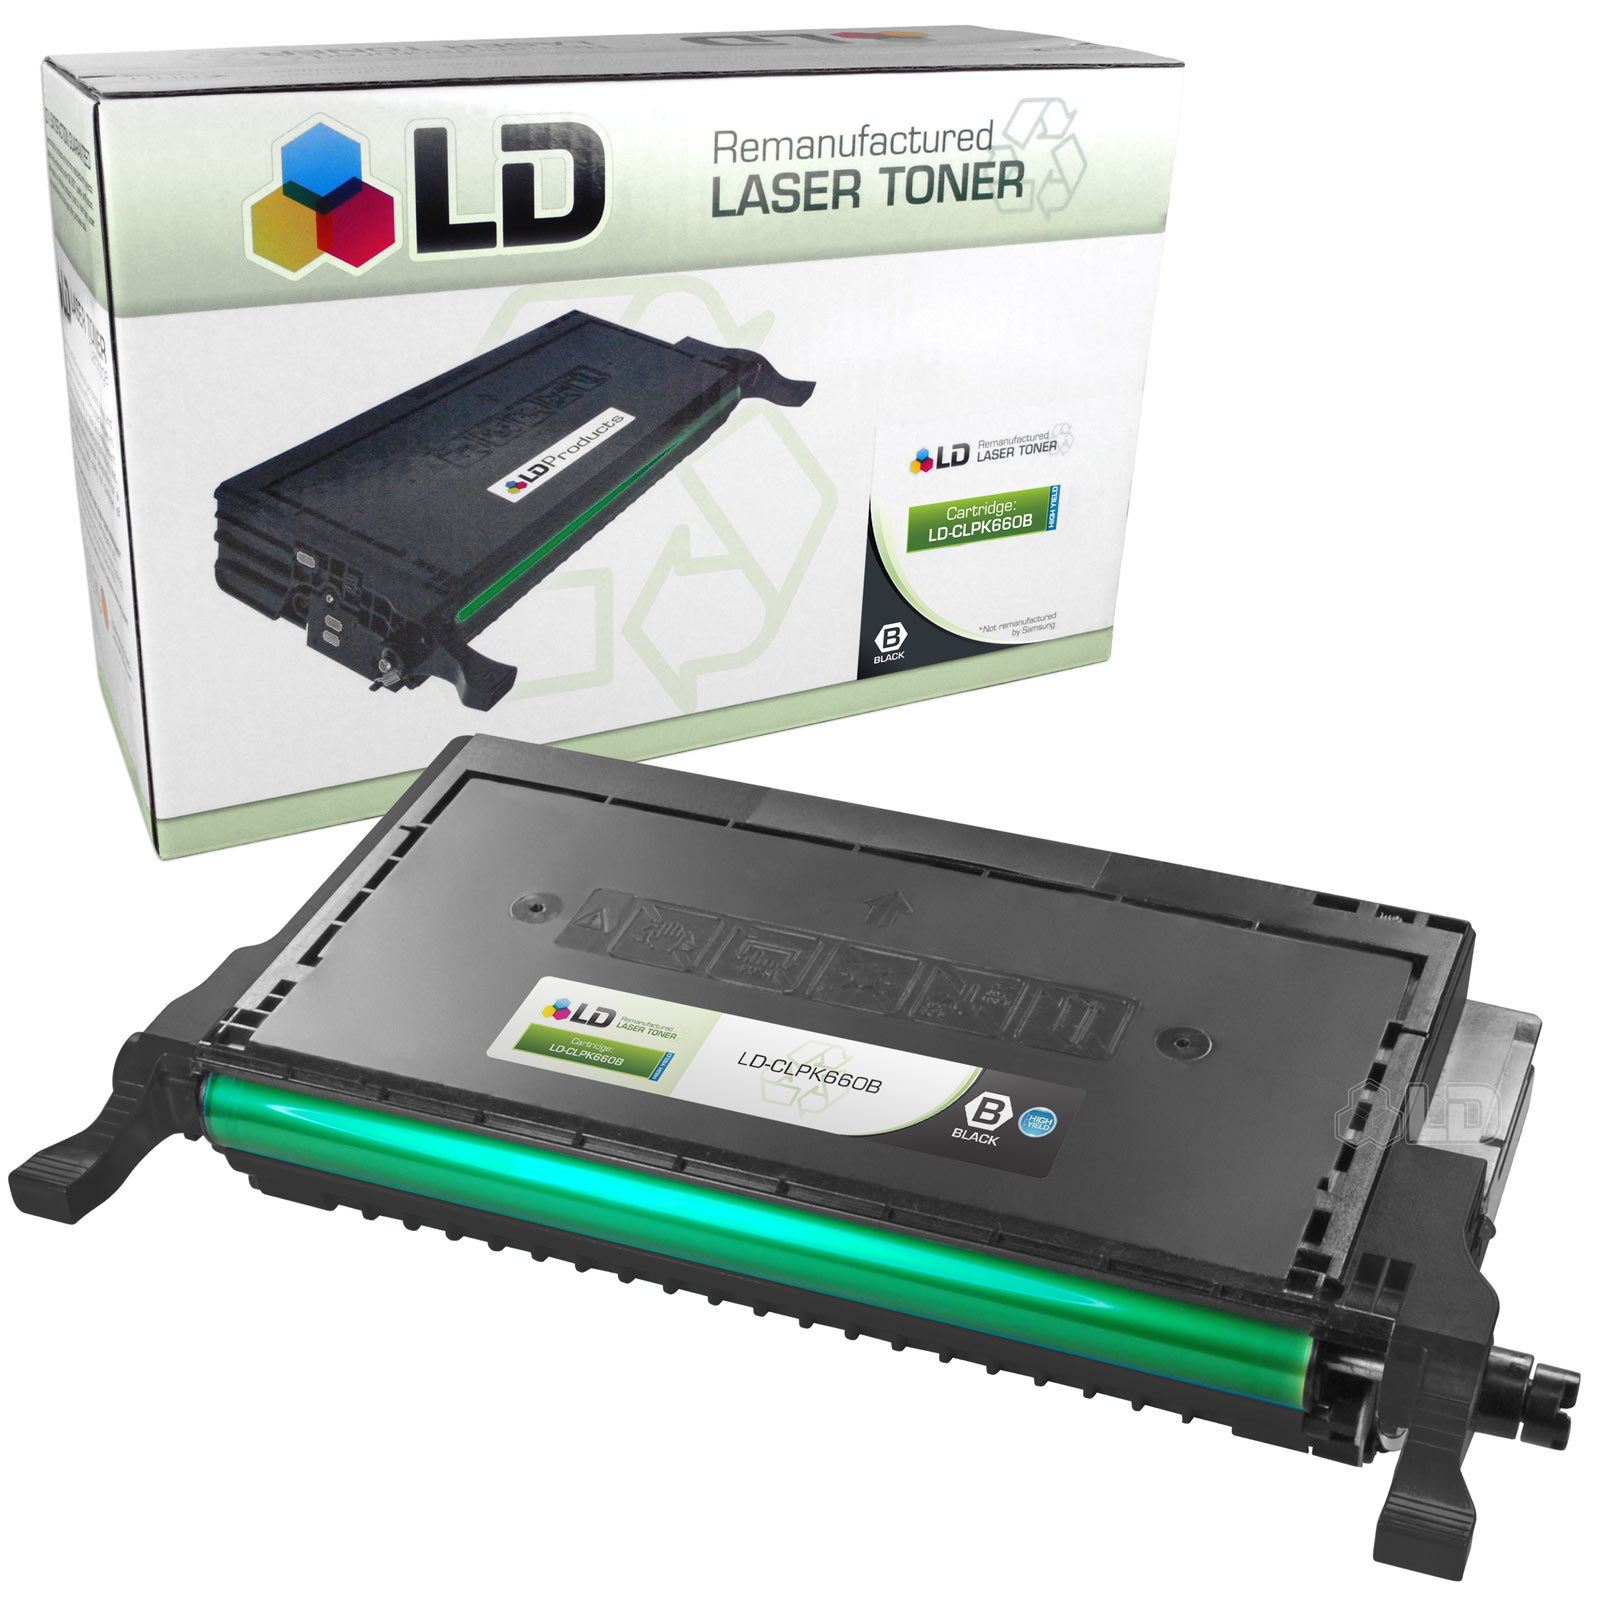 LD Remanufactured Replacement CLP-K660B High Capacity Black Laser Toner Cartridge for use in Samsung CLP-610ND, CLP-660N, CLP-660ND, CLX-6200FX, CLX-6200ND, CLX-6210FX, CLX-6240FX s - image 1 of 1